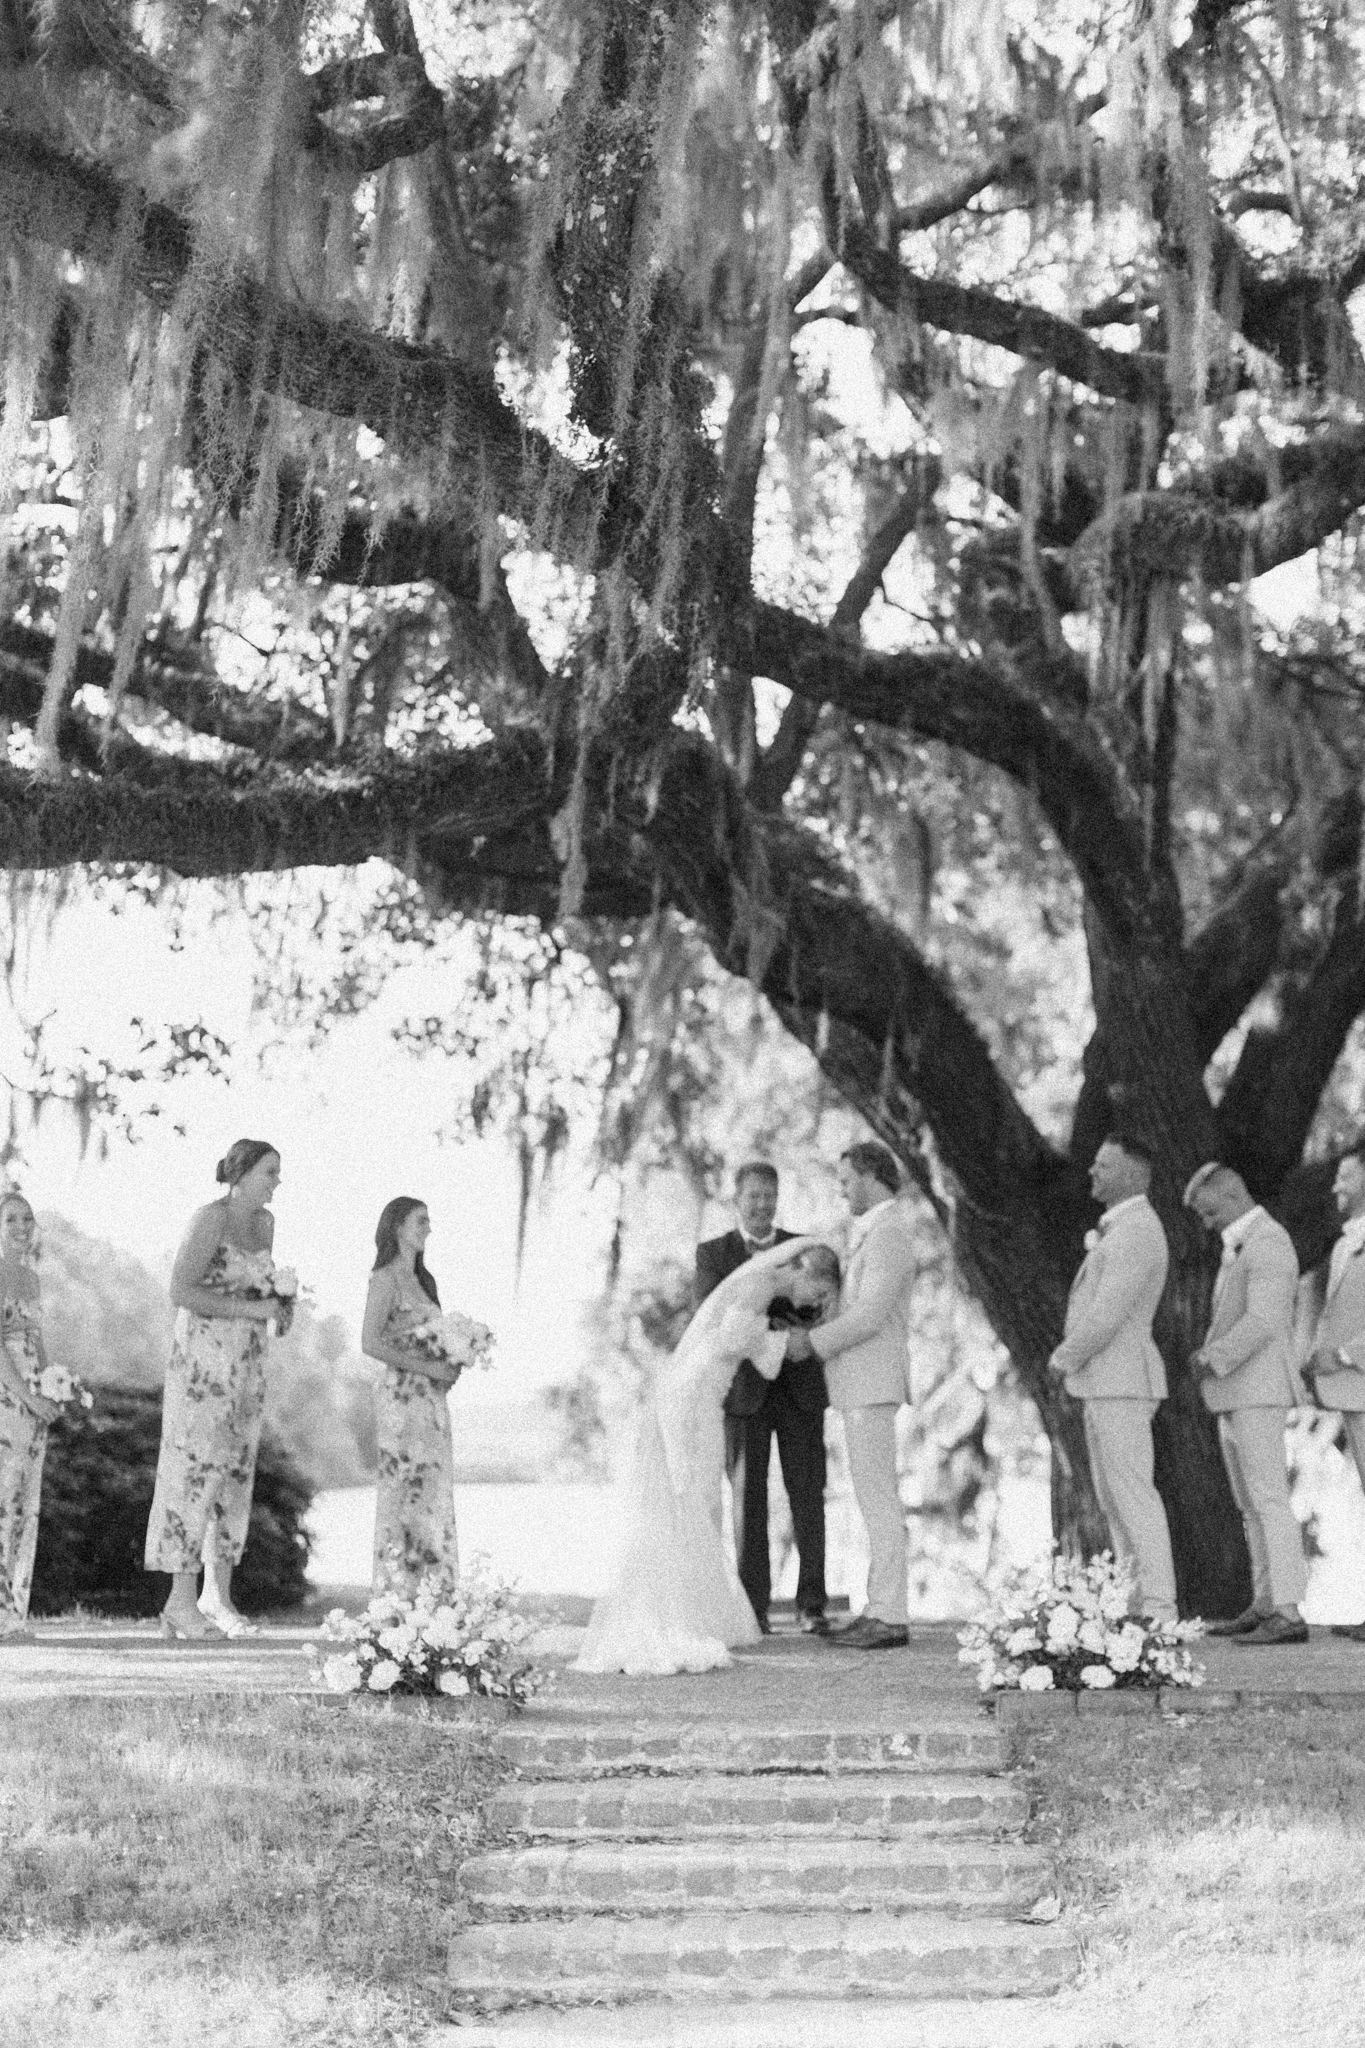 middleton-place-a-garden-wedding-in-charleston-south-carolina-hayley-moore-photography